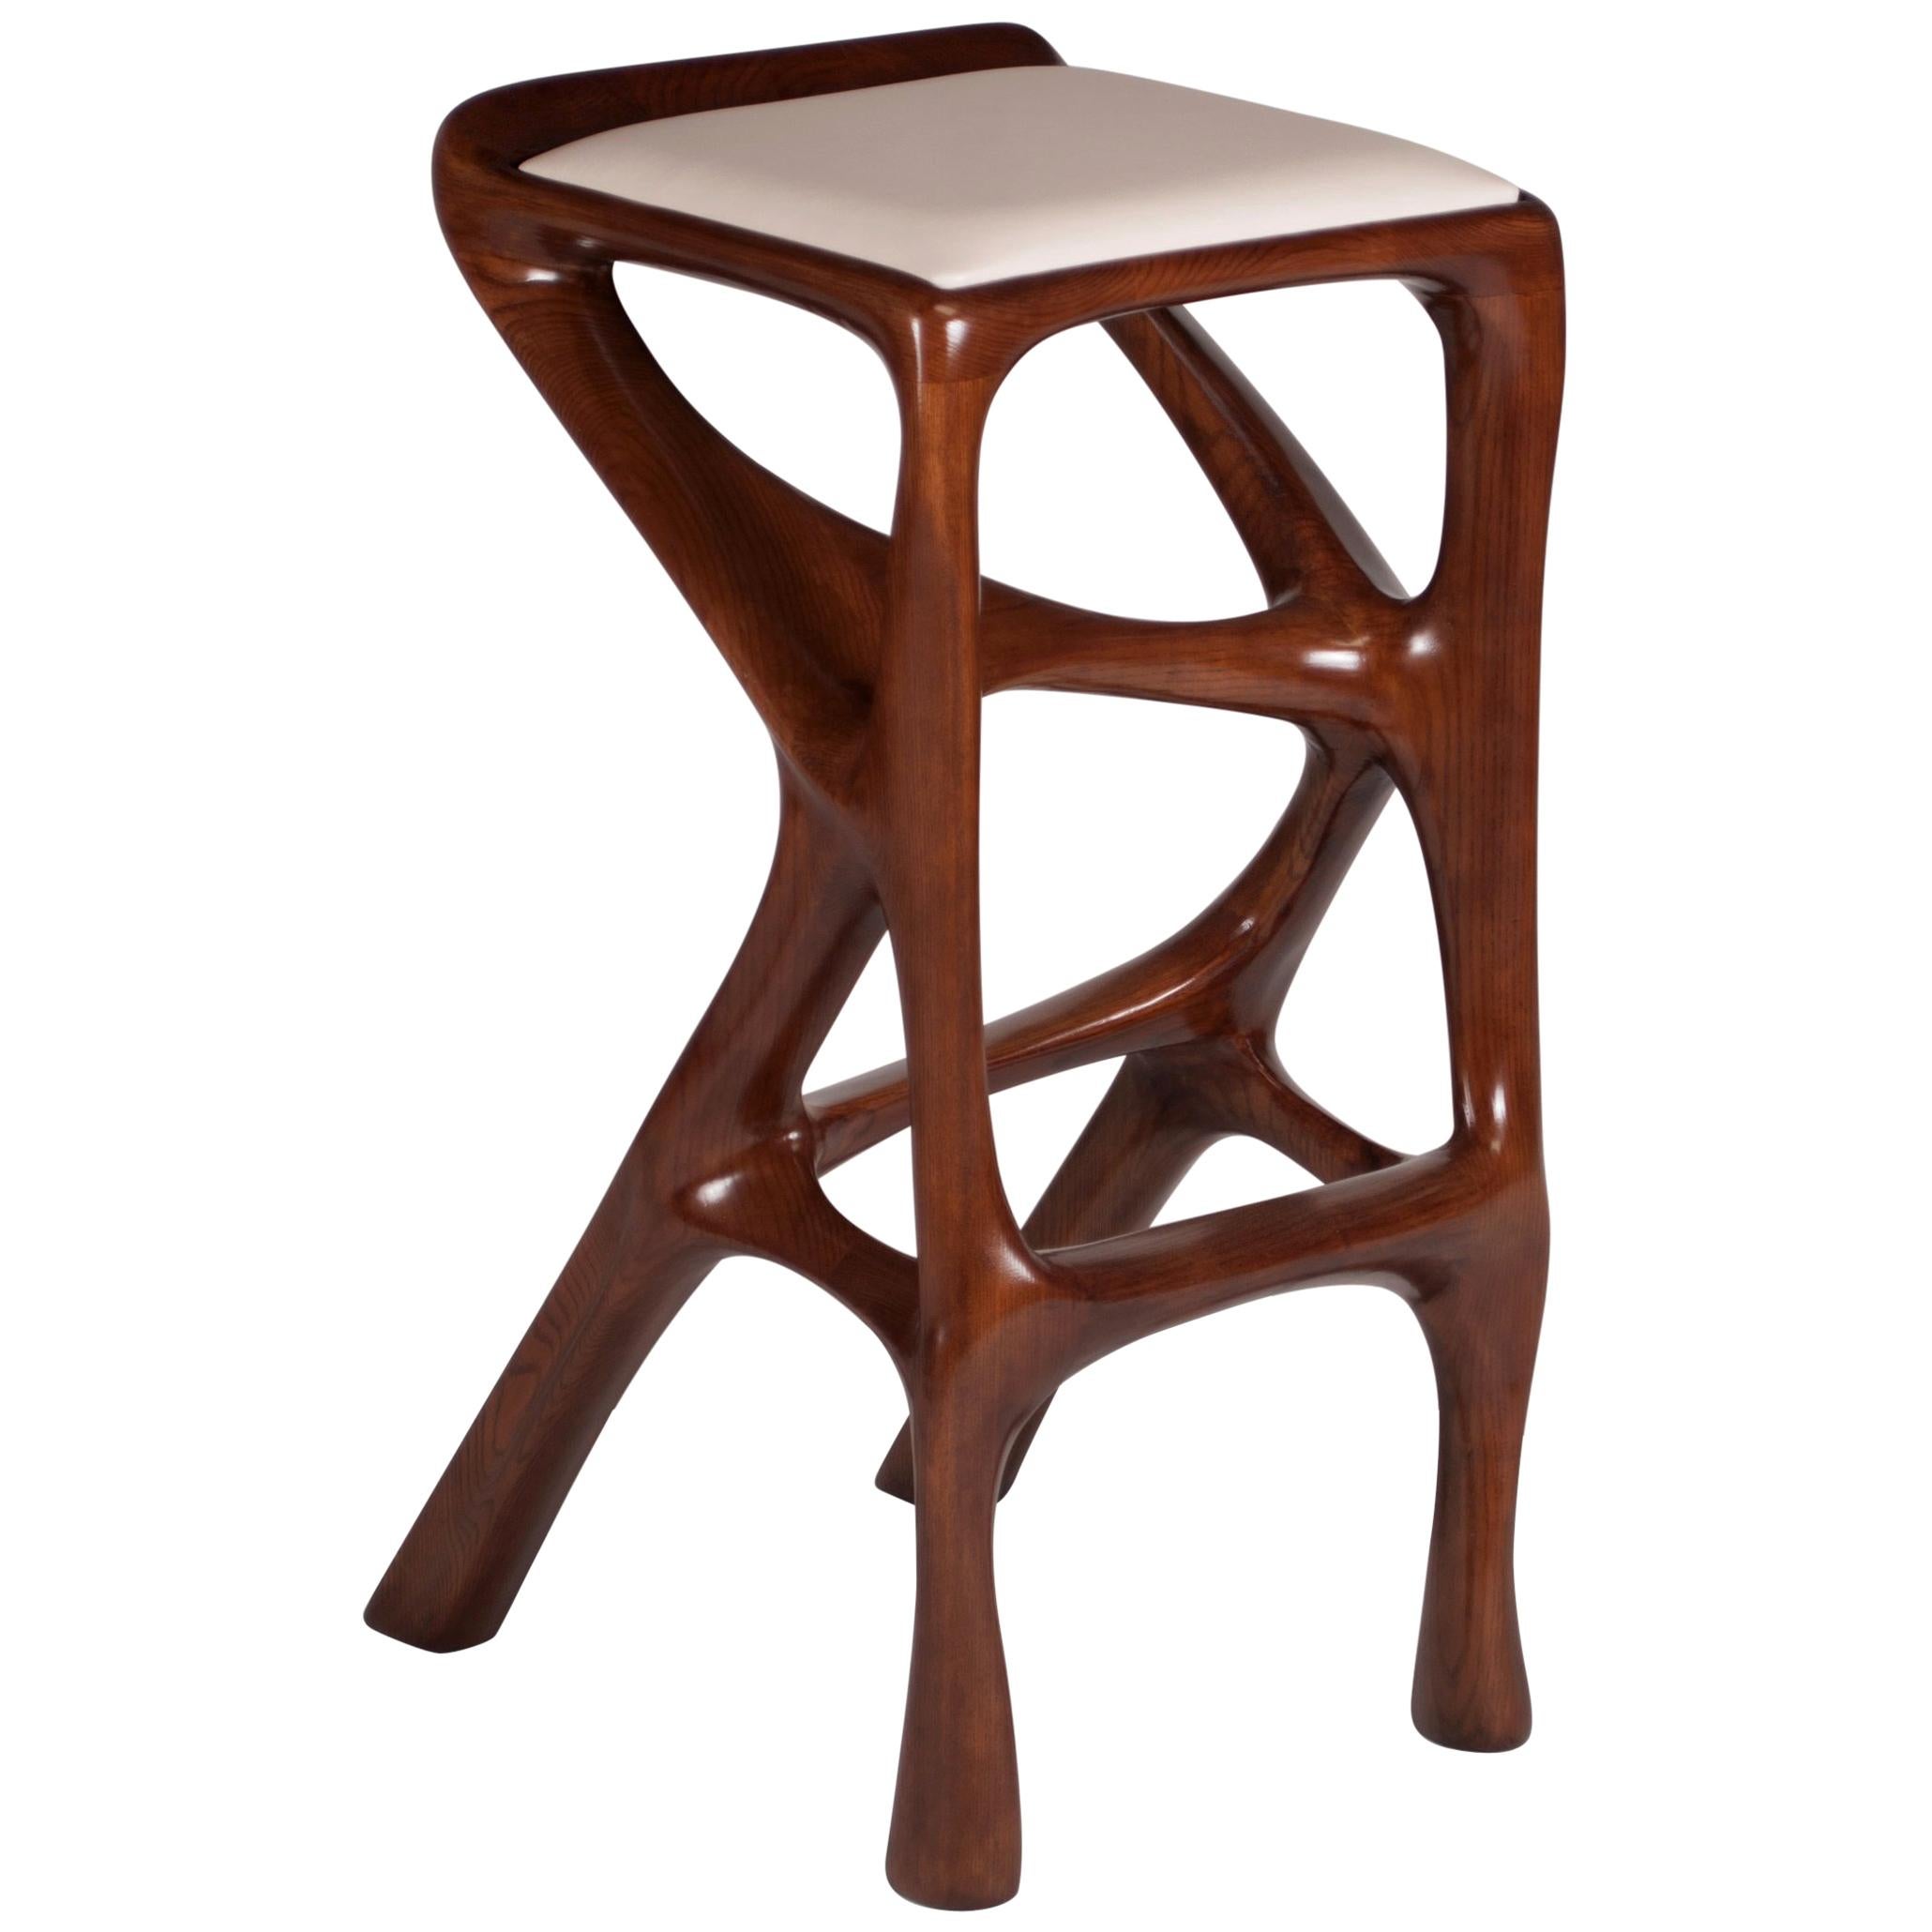 Barstool designed by Amorph made out of solid ashwood and leather. Stain color: Rusted walnut
Dimension: 31